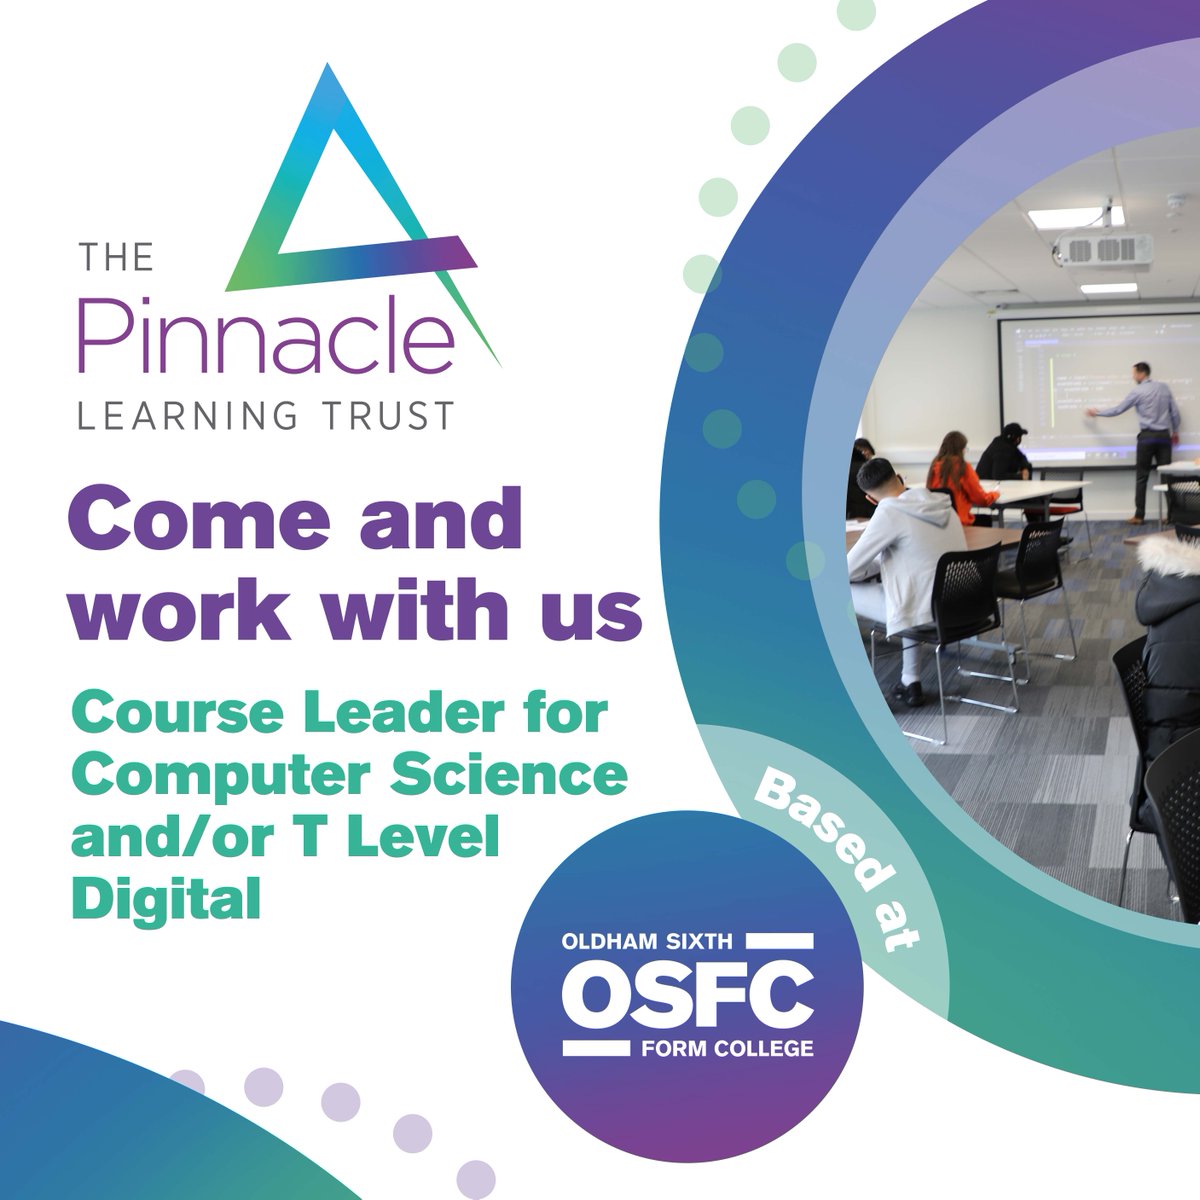 Come and work with us - Course Leader for Computer Science and/or T Level Digital at @OSFC_Info : bit.ly/3Pc2jQ8 Closing date for applications is Monday 15th April, 12 noon.